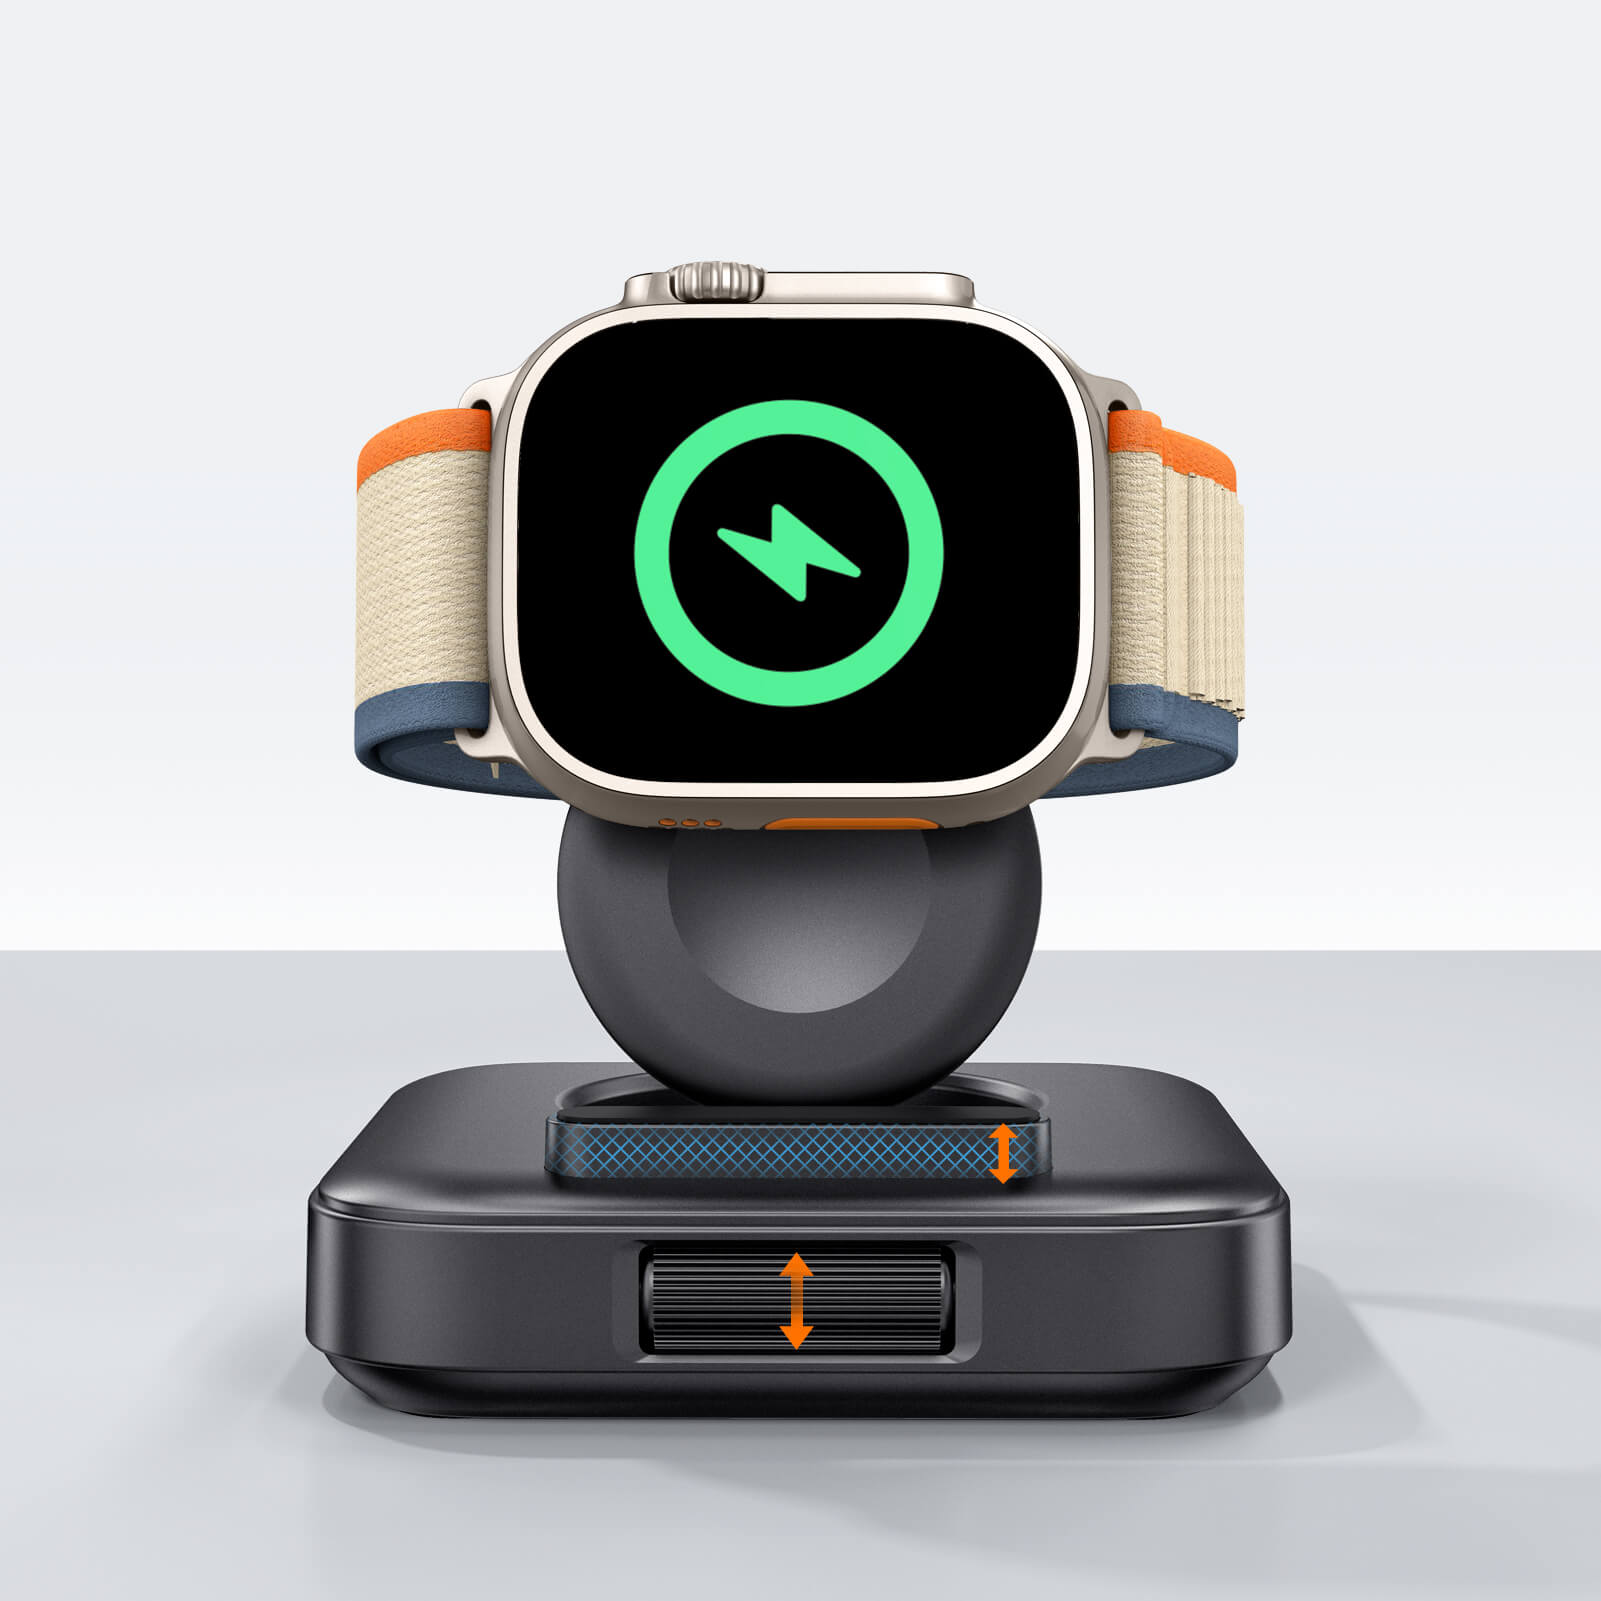 Charging Station for Apple Watch: Foldable & Portable Design, Safe Charging, Case Friendly, with Intelligent LED Indicator. The SwanScout Charging Station for Apple Watch is designed for on-the-go power and speed, ensuring your Watch devices stay charged wherever you are.